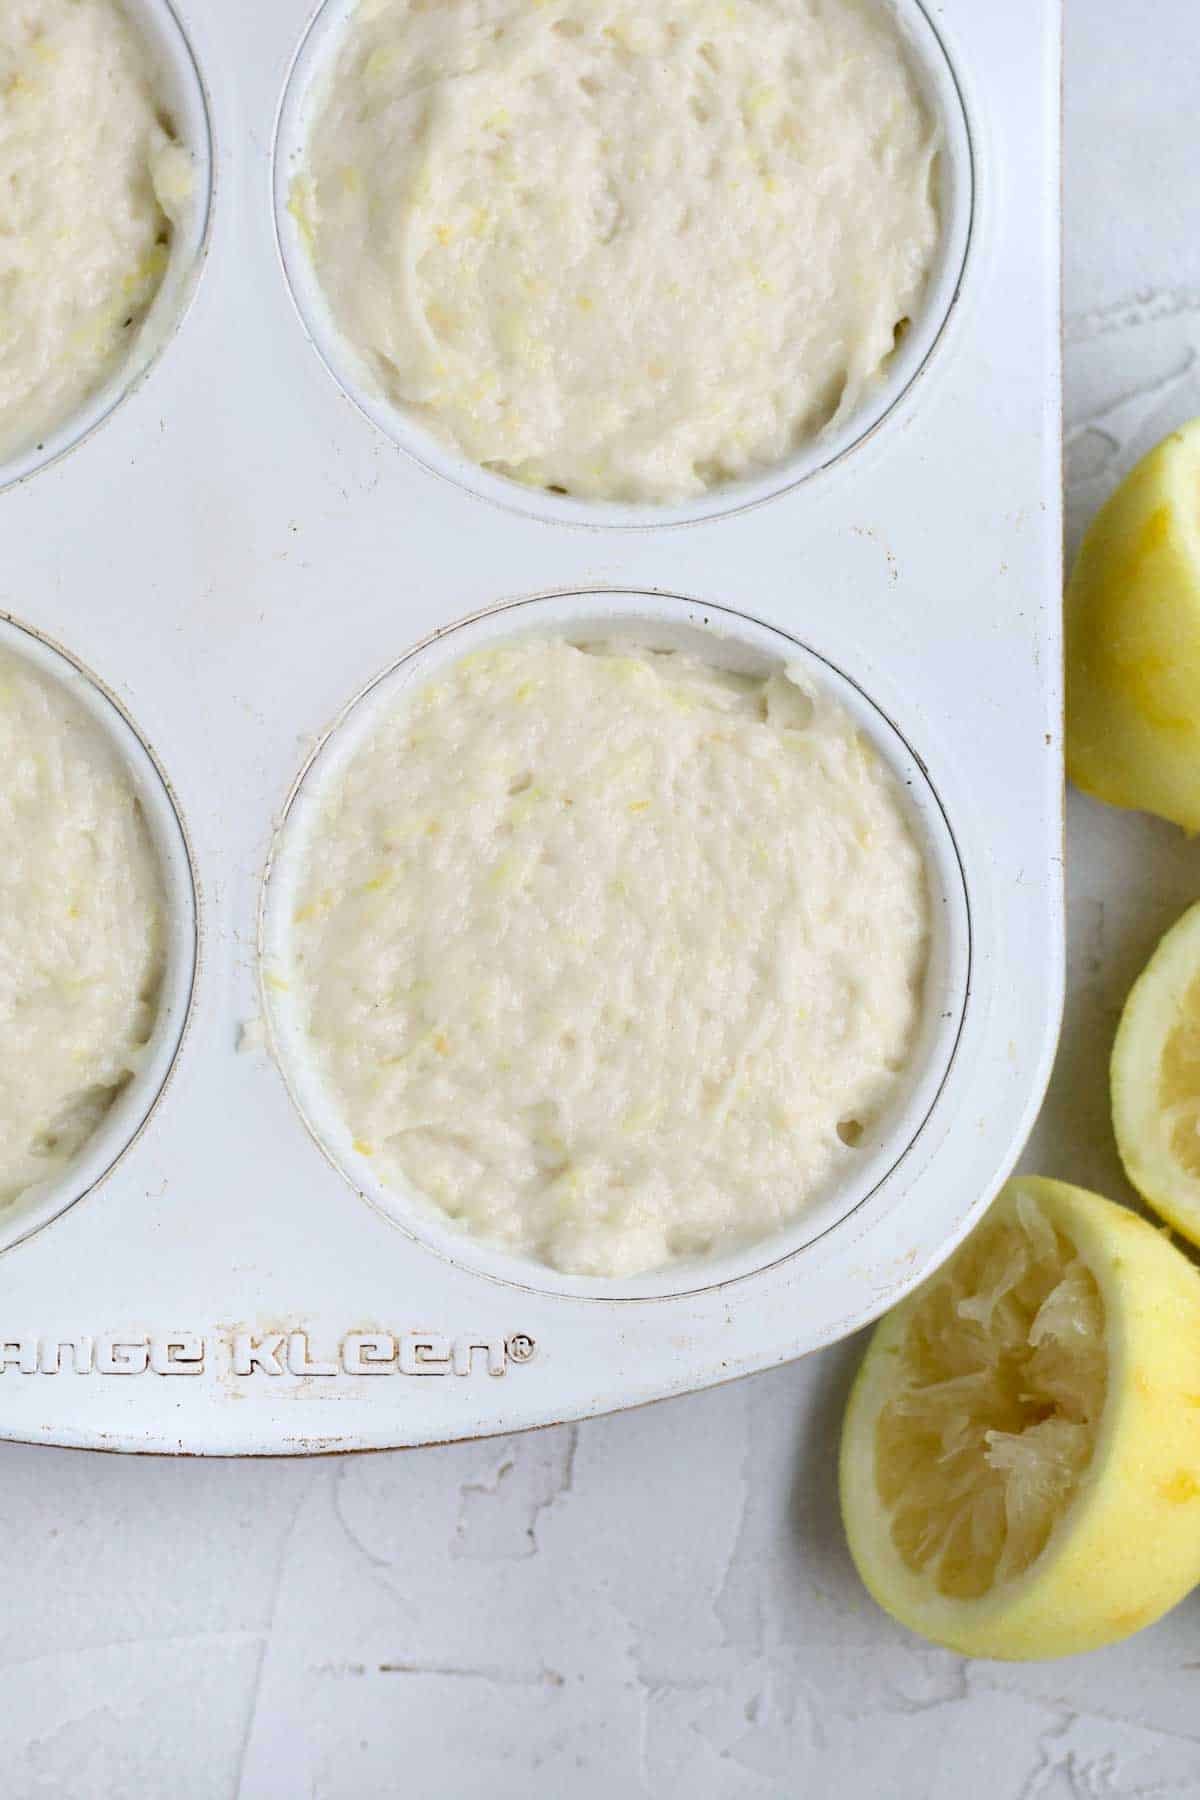 Filling a large muffin tin with the Lemon Muffin batter.